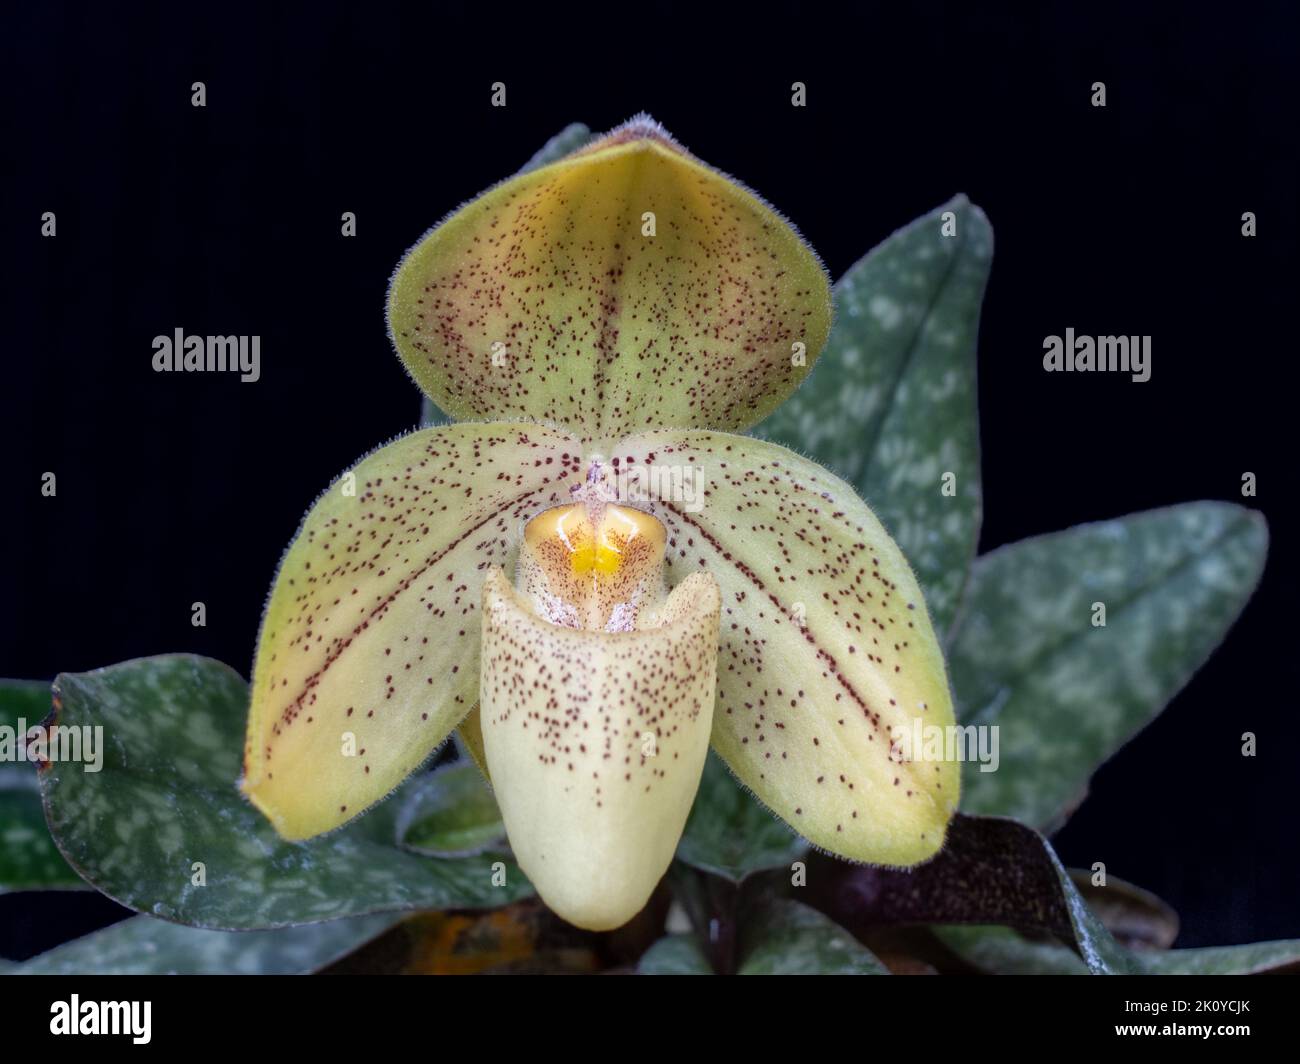 Closeup of bright yellow with red dots and lines flower of lady slipper orchid species paphiopedilum concolor striatum isolated on black background Stock Photo